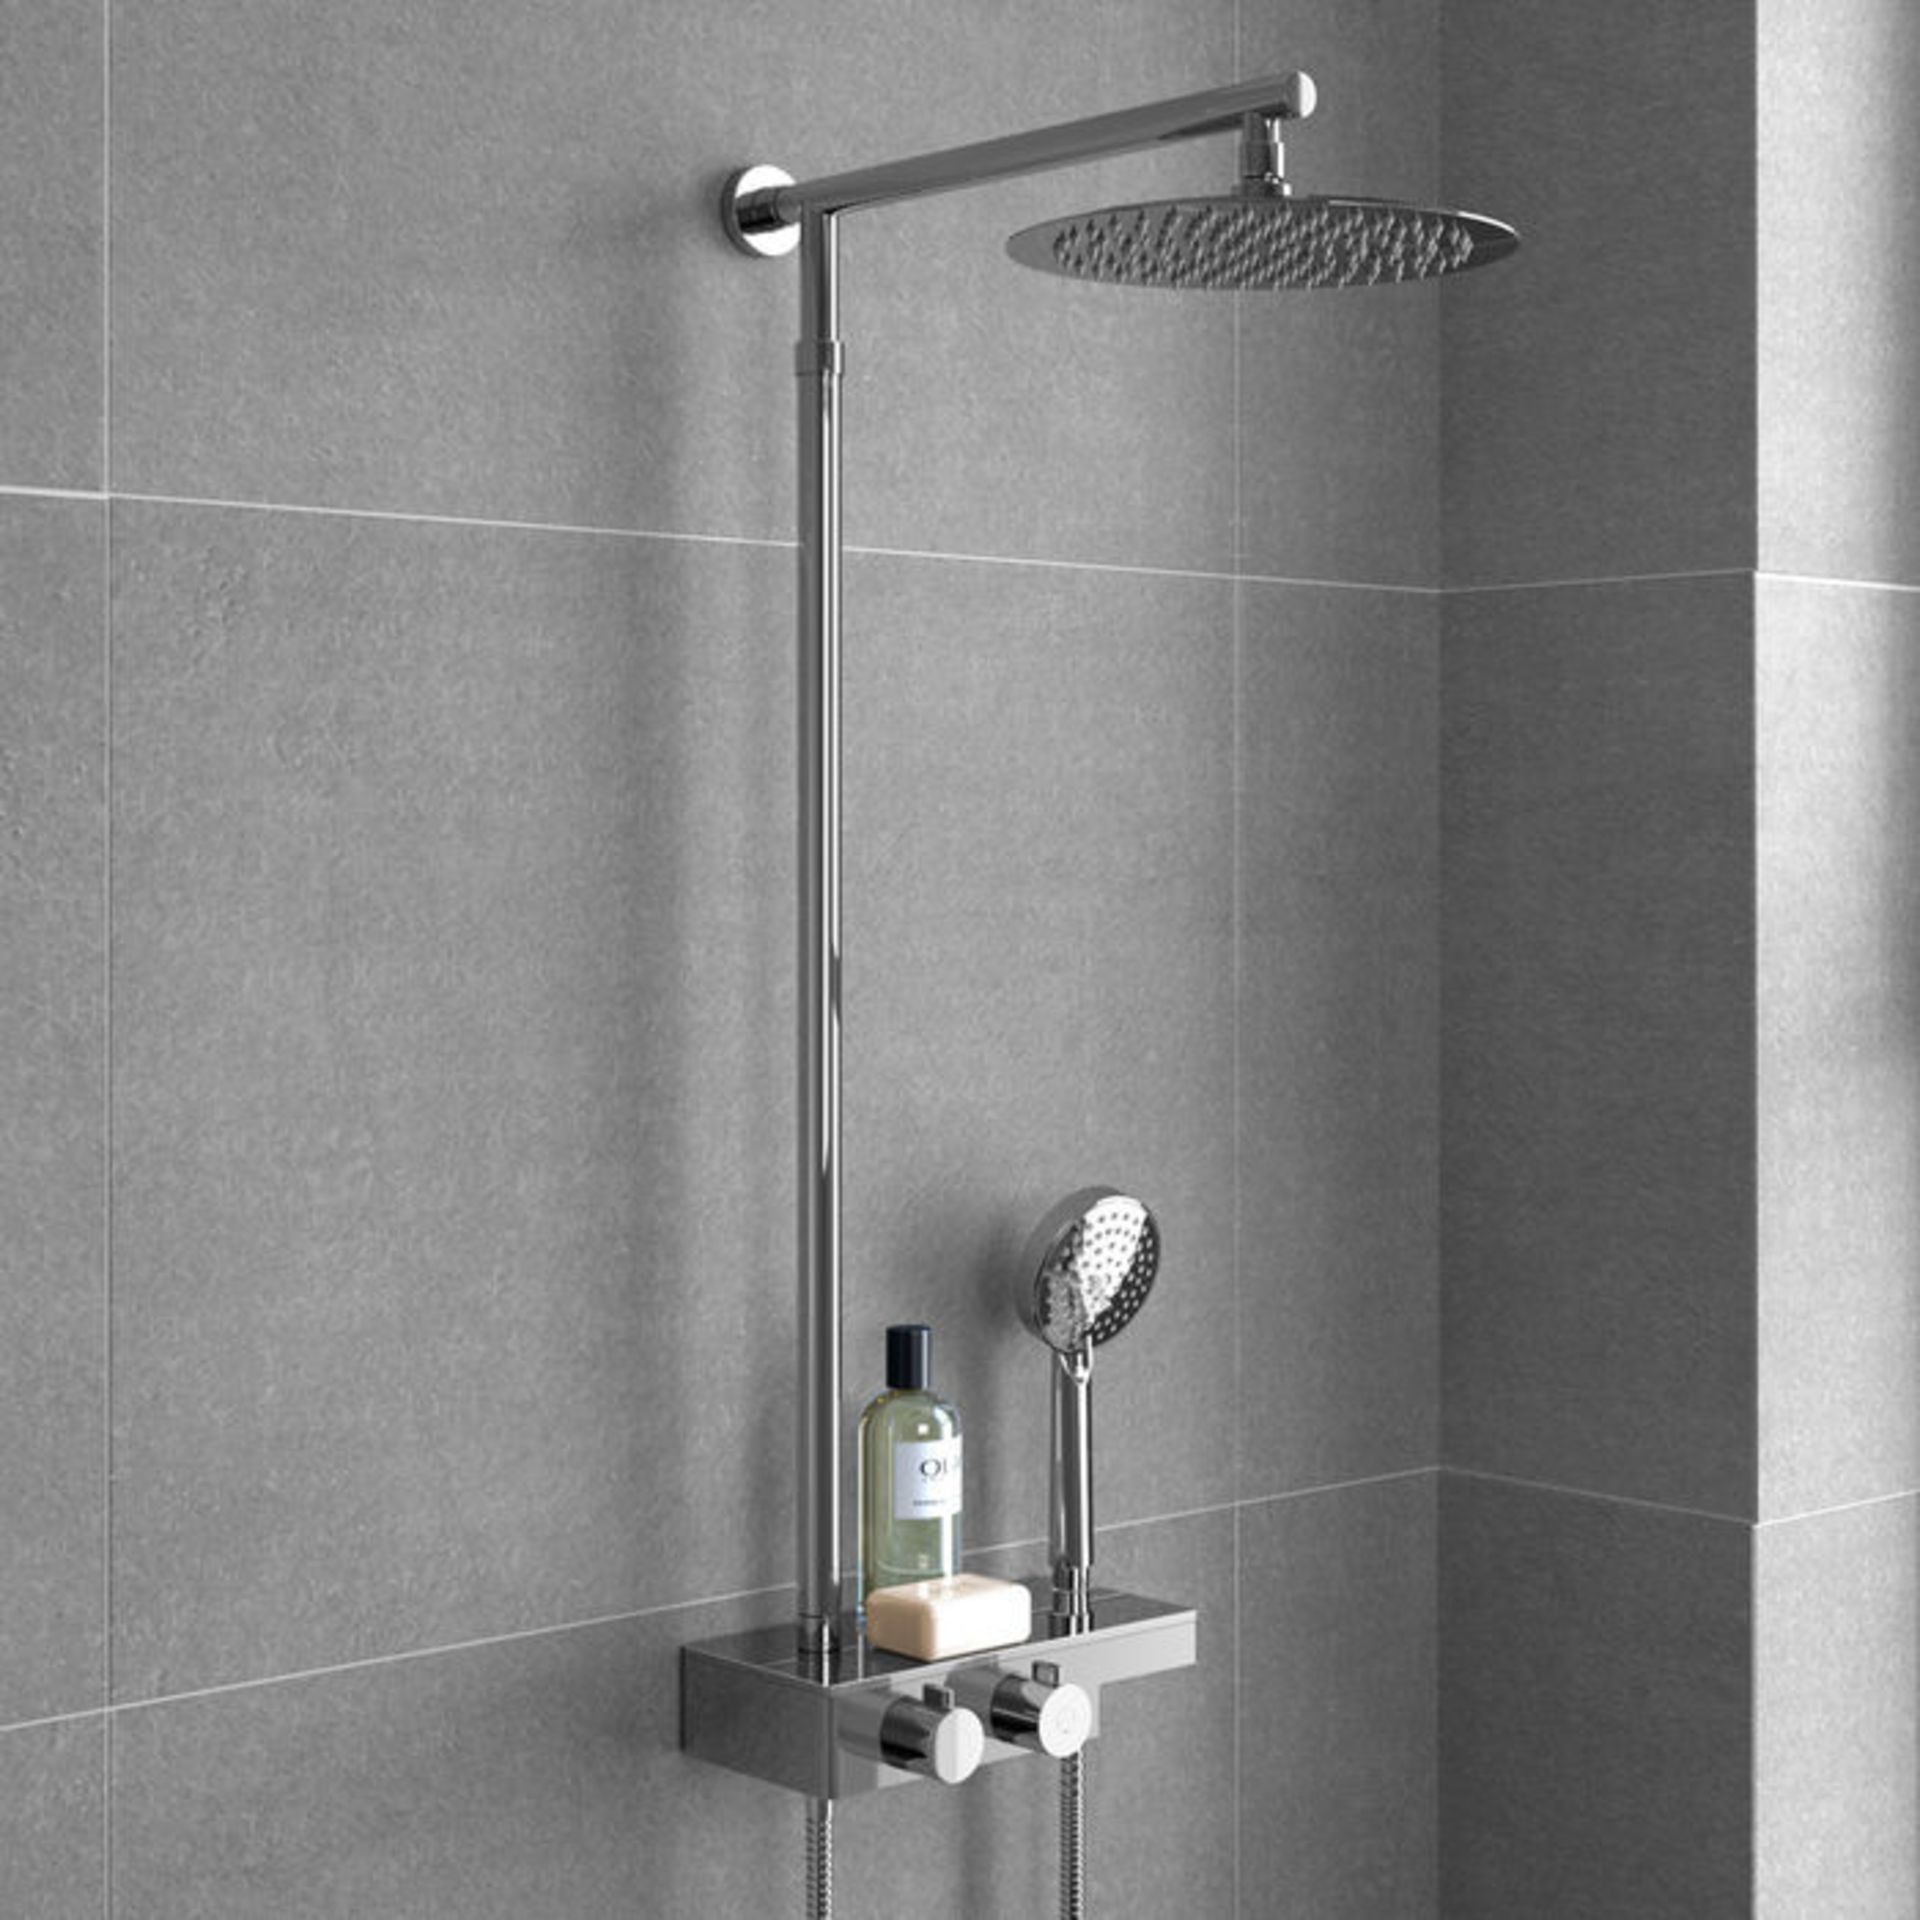 (ZL208) Round Exposed Thermostatic Mixer Shower Kit & Large Head. RRP £349.99. Cool to touch - Image 3 of 4